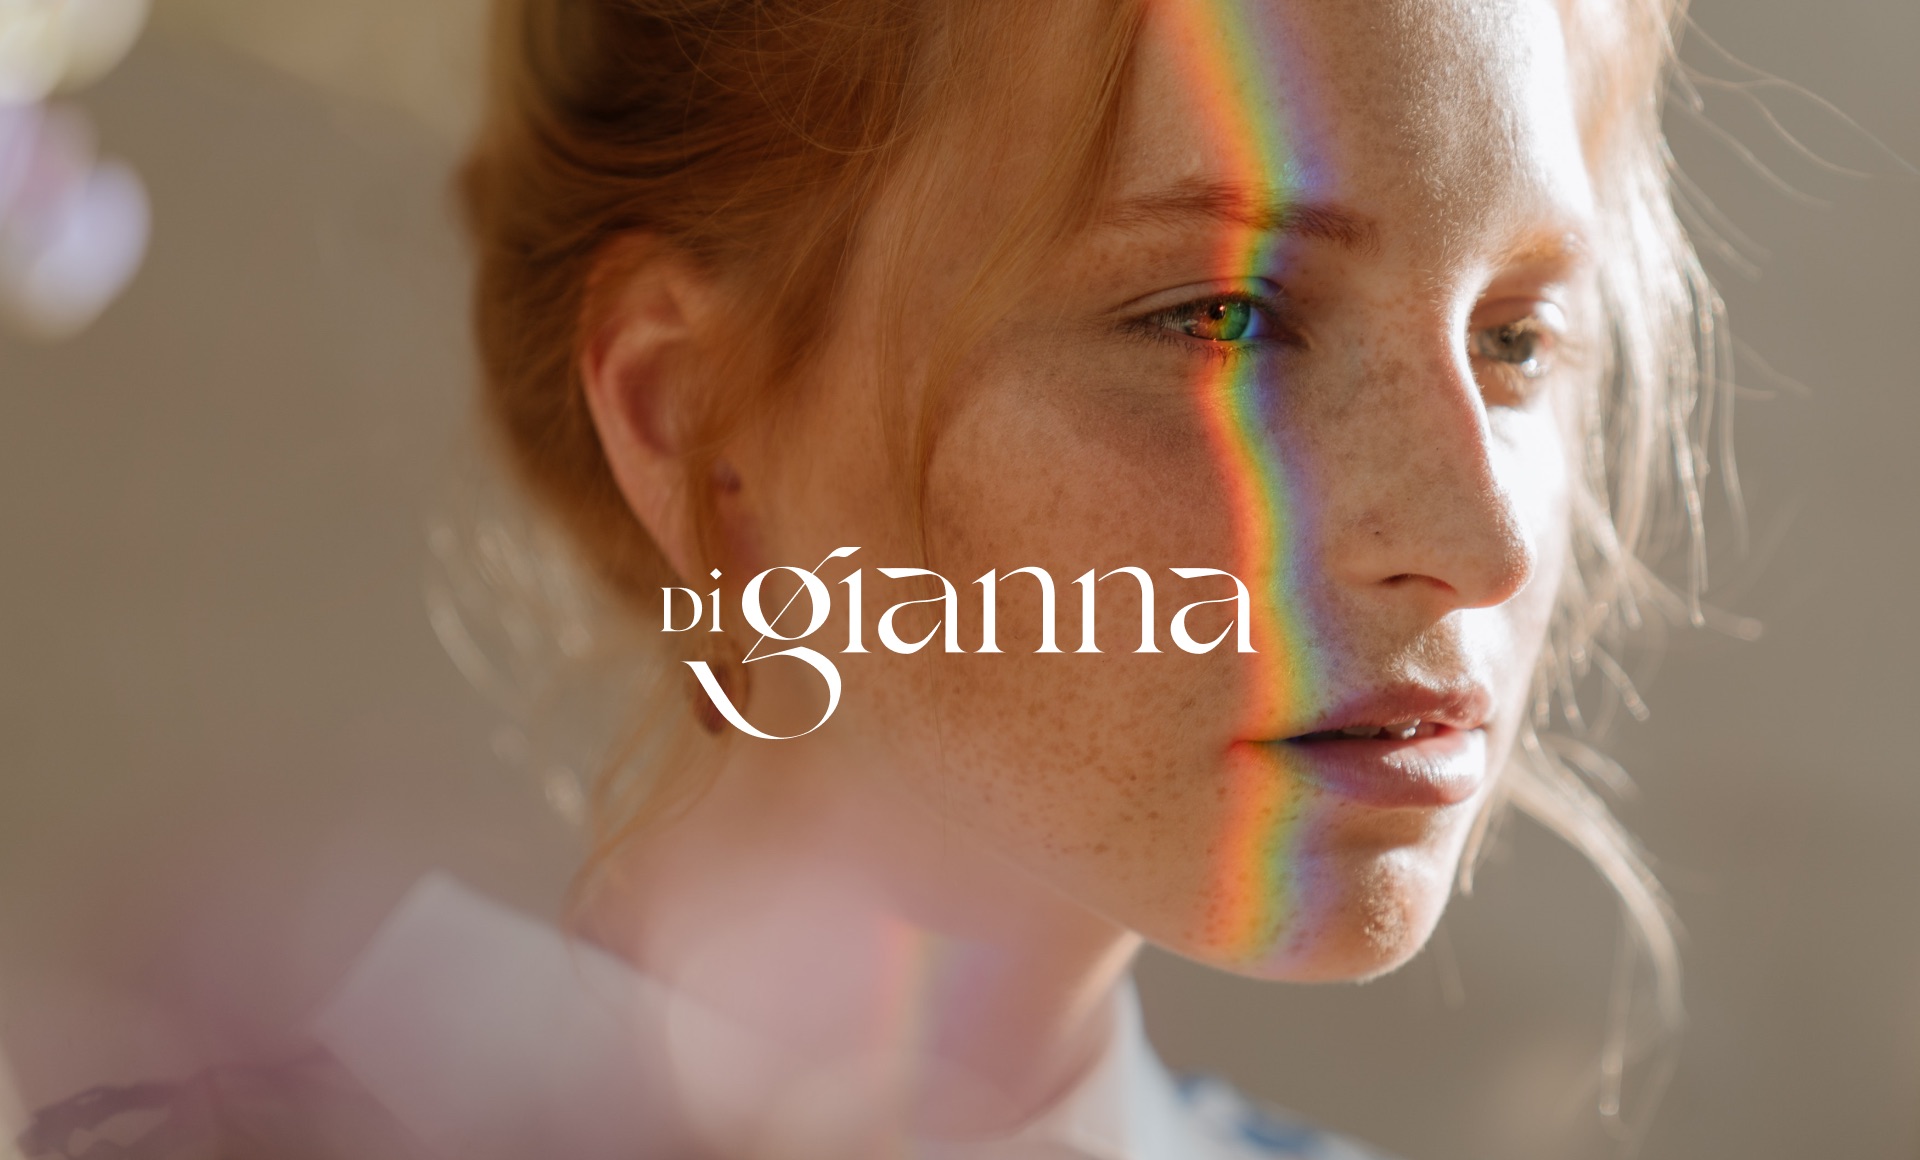 Enhance Well-Being with Di Gianna: A Natural Essential Oil Brand by Alex Monteiro